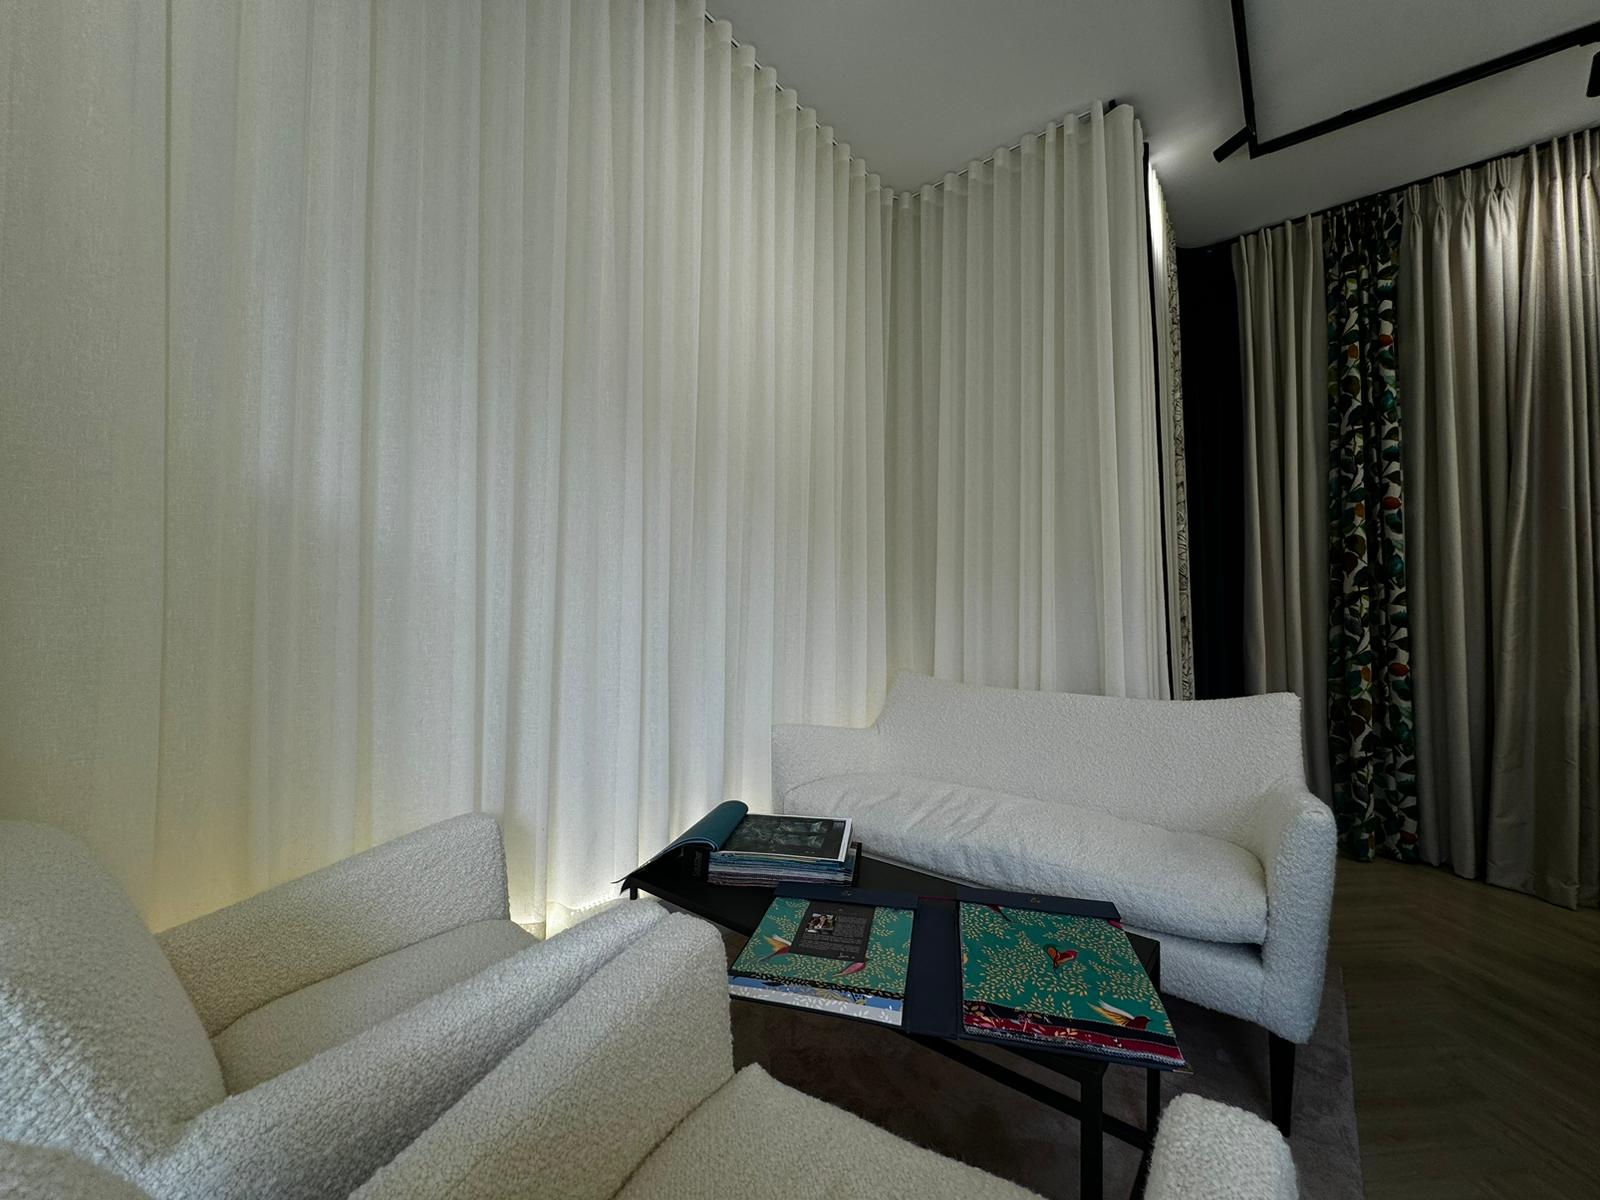 Designer furniture (which we also now sell) in our consulting area where clients and Interior Designers might peruse the latest fabrics in North London's finest Designer Fabric showroom, also displaying an uplit sheer wave curtain to disguise an otherwise plain wall